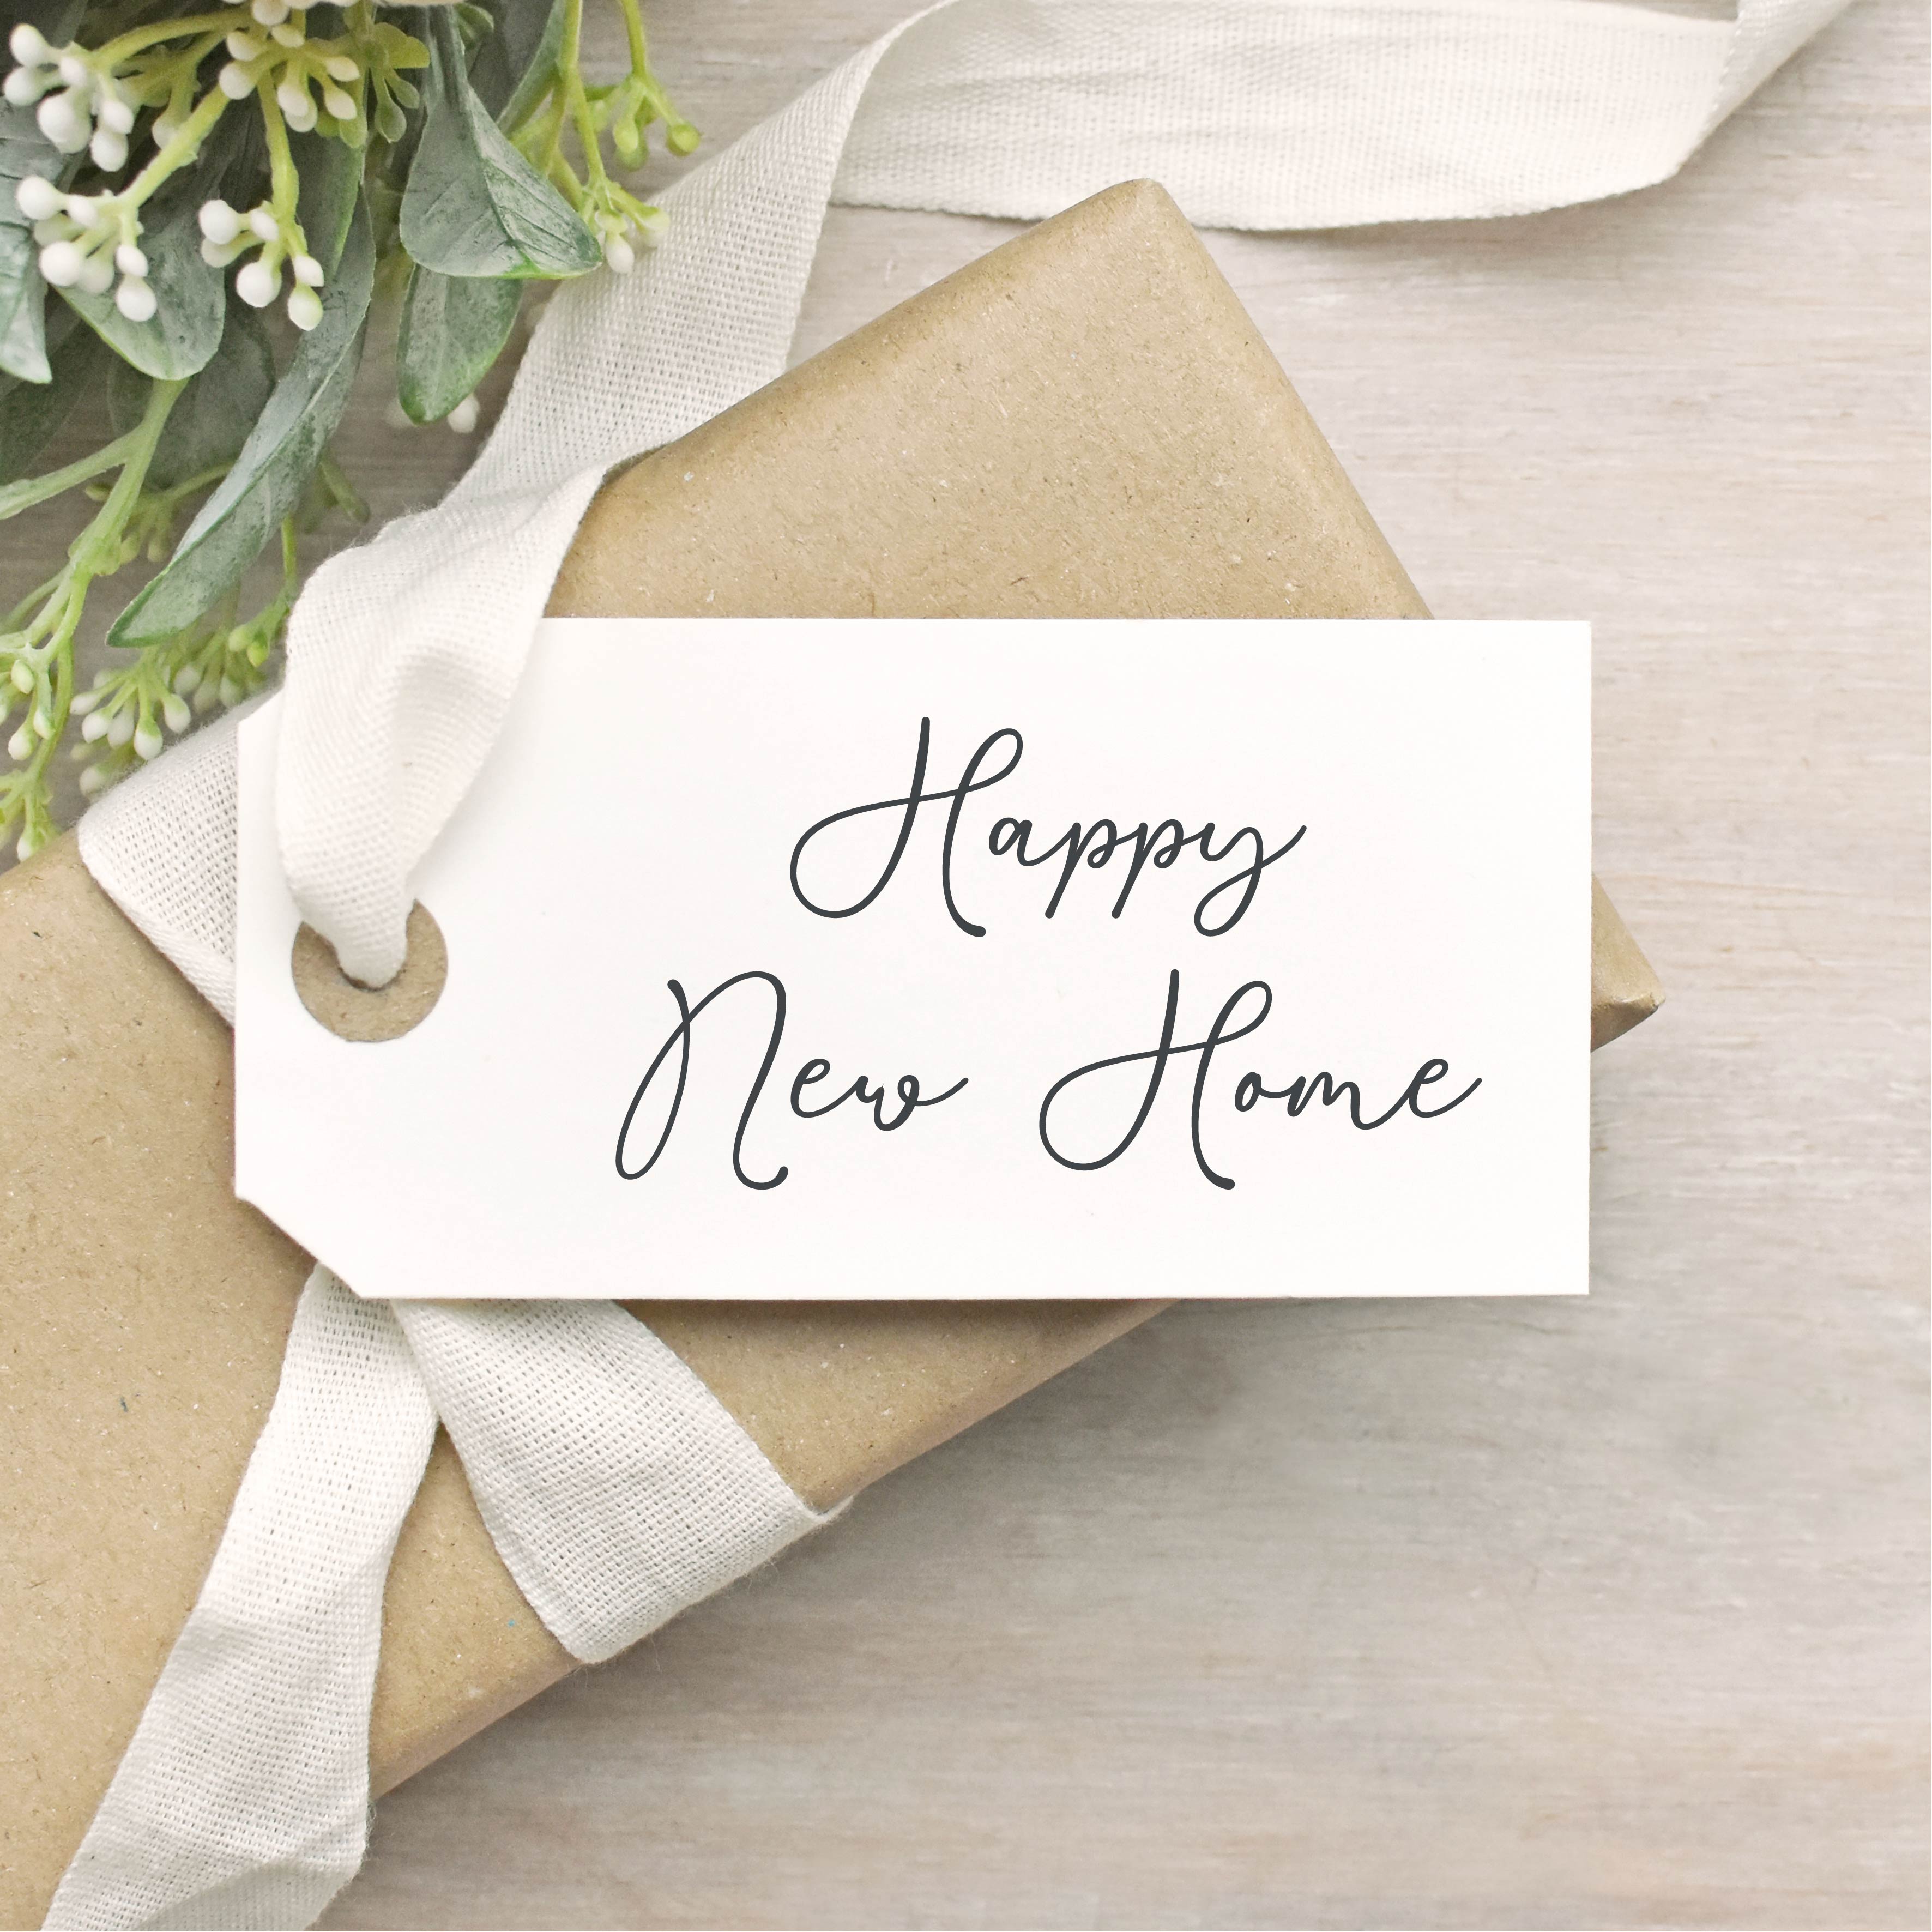 Happy New Home Rubber Stamp